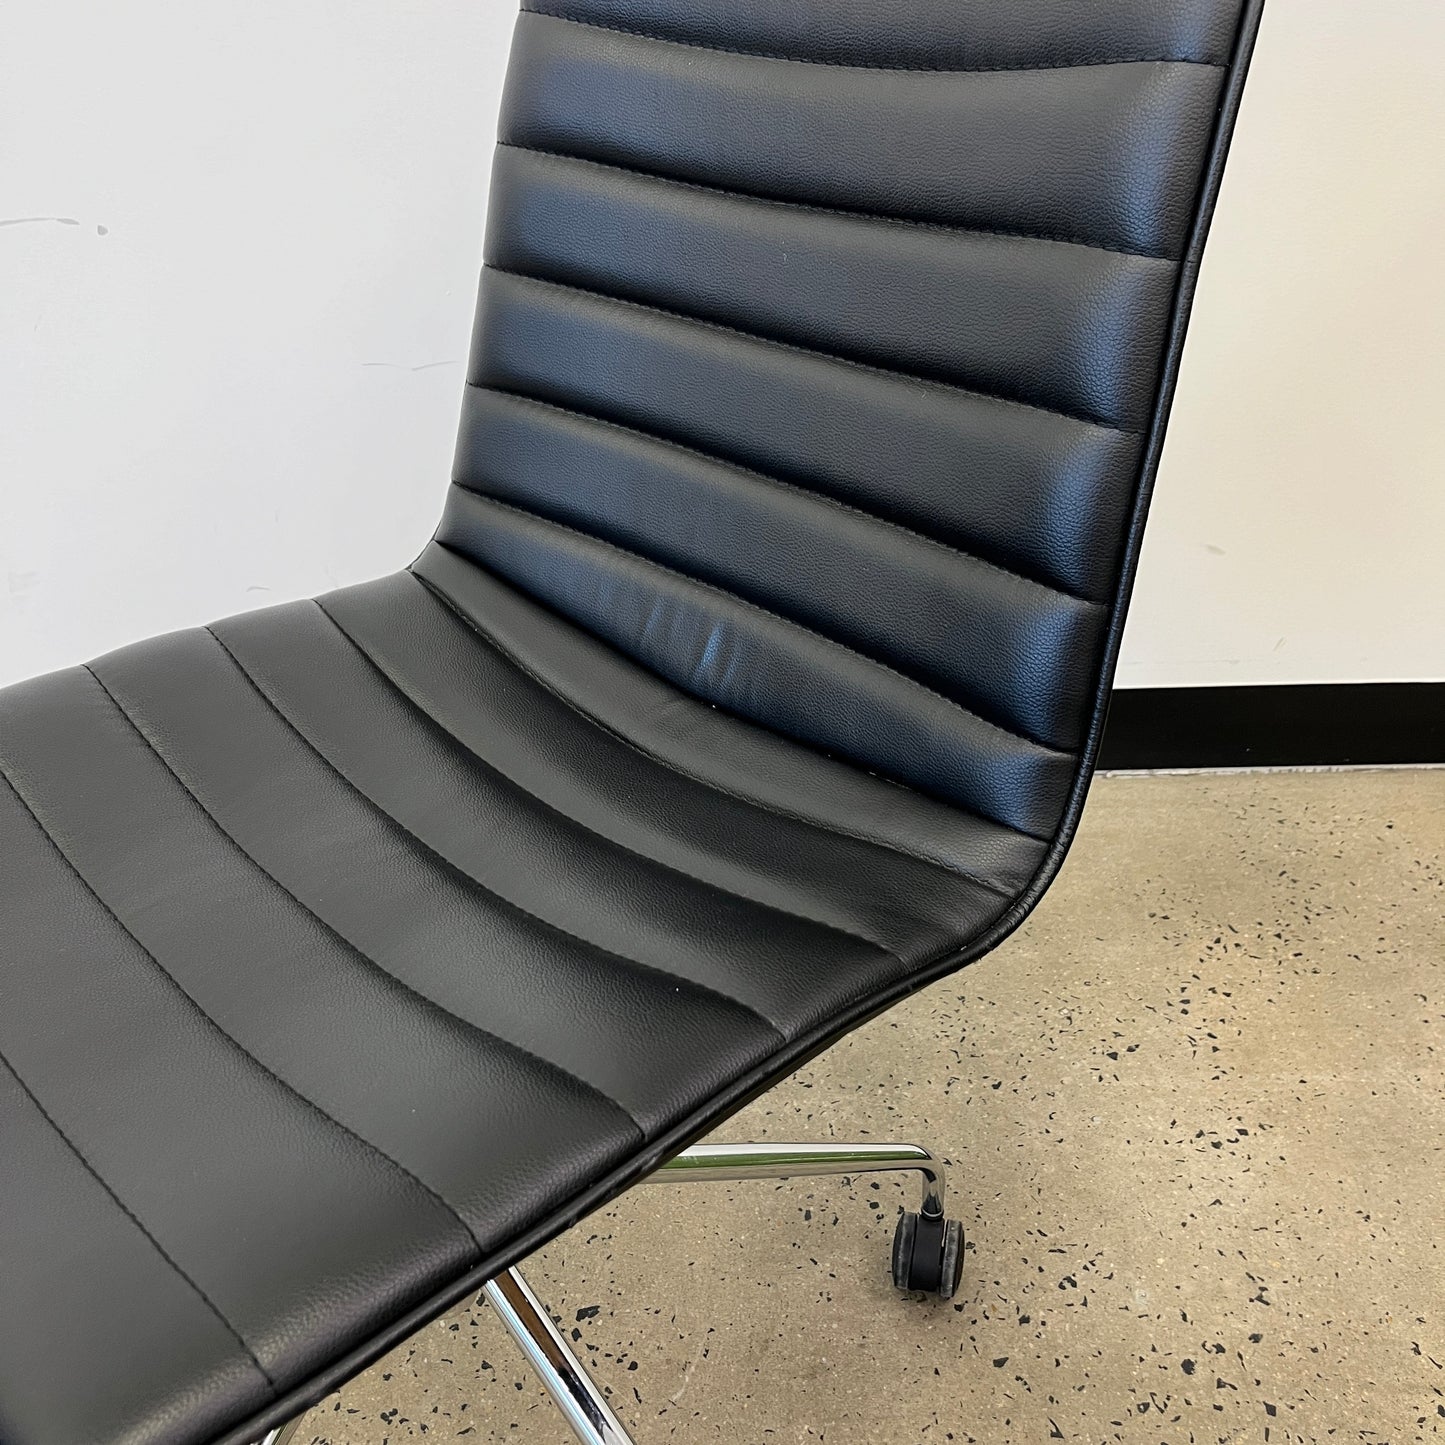 Chino Leather-Look Black Swivel Chair on Castors